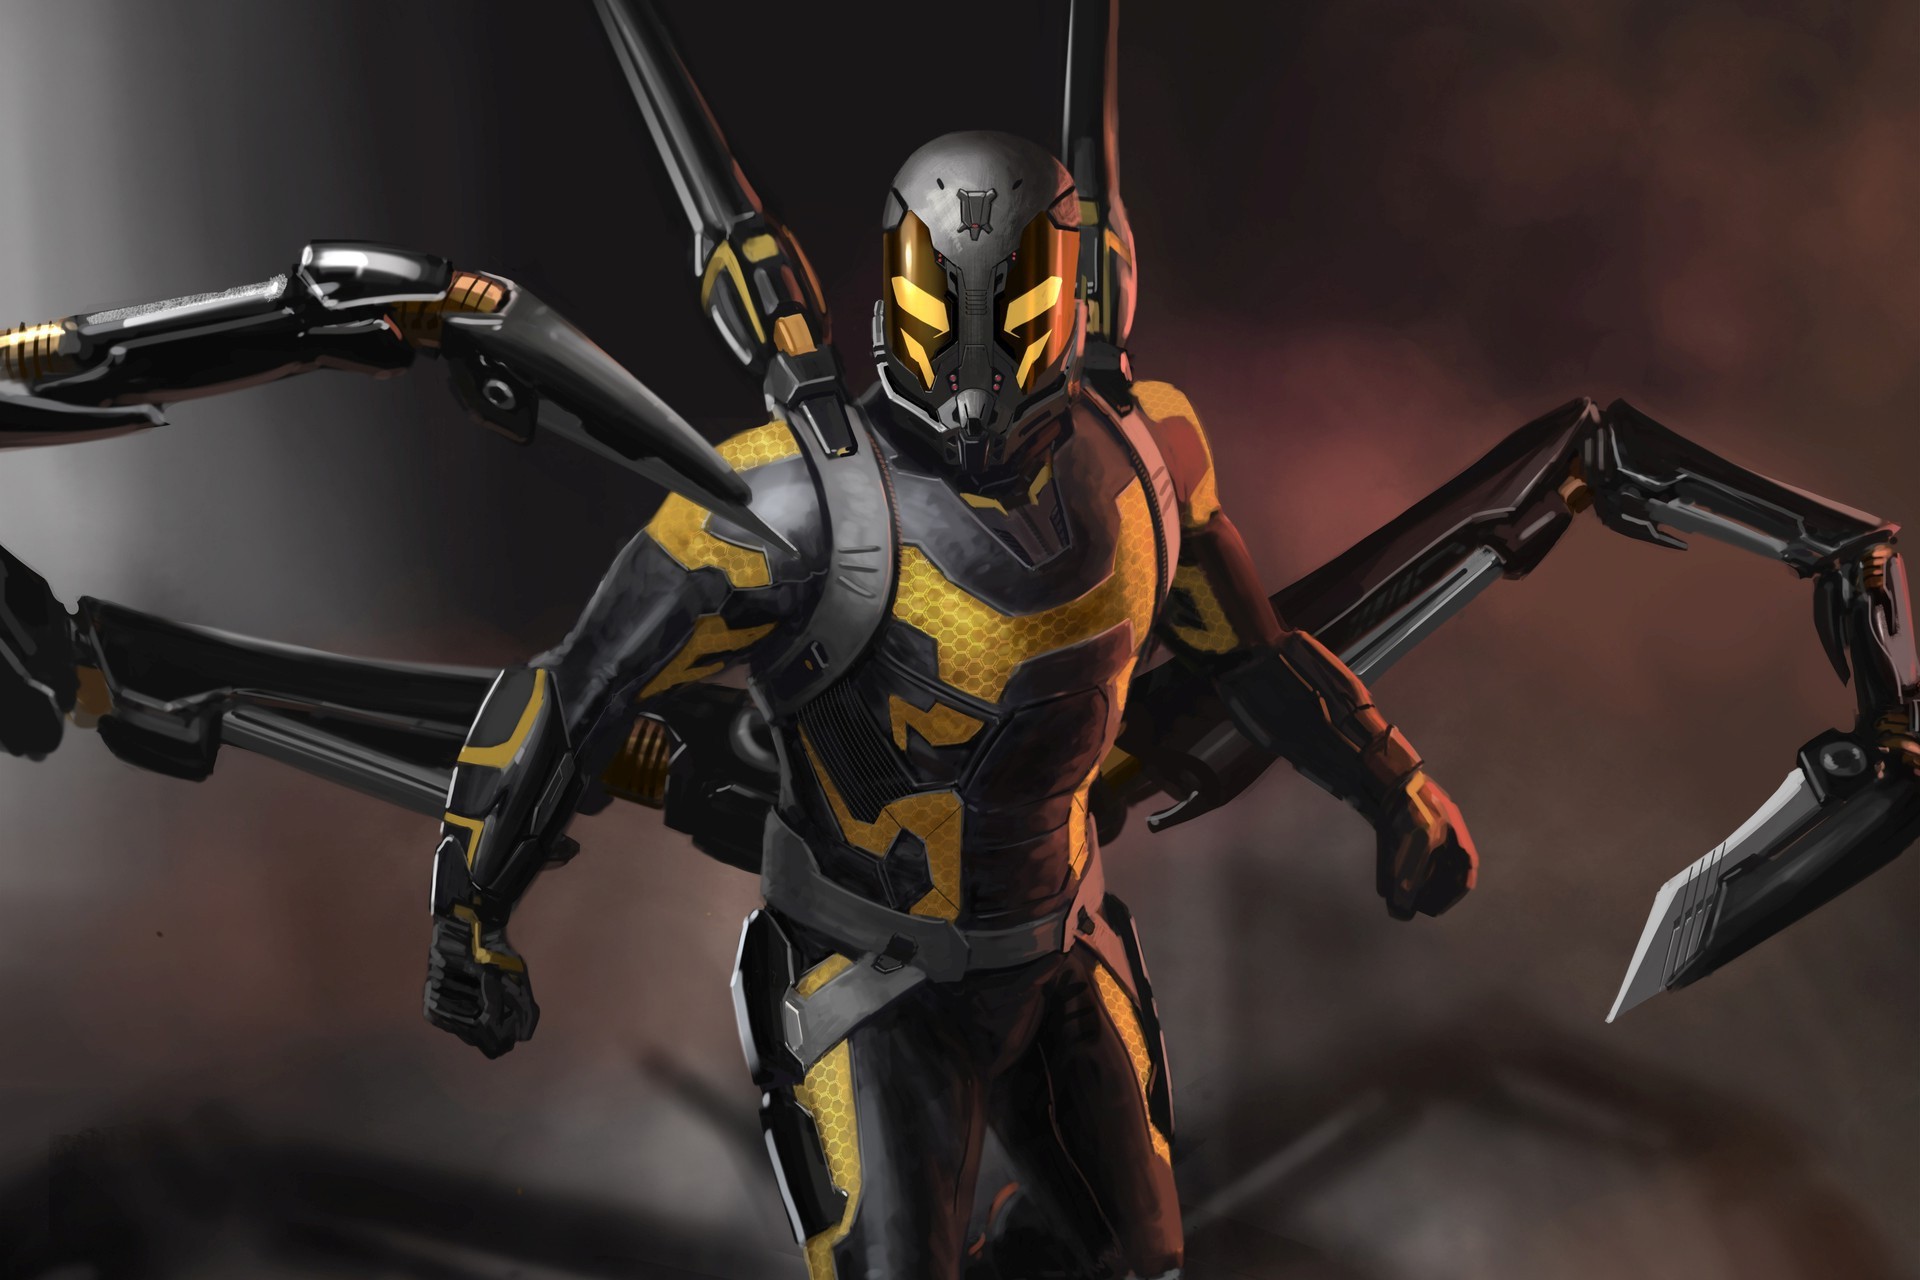 ant marvel jacket yellow yellowjacket comics movies artwork wallpapers desktop 3d backgrounds px mobile wallhaven screen wallup